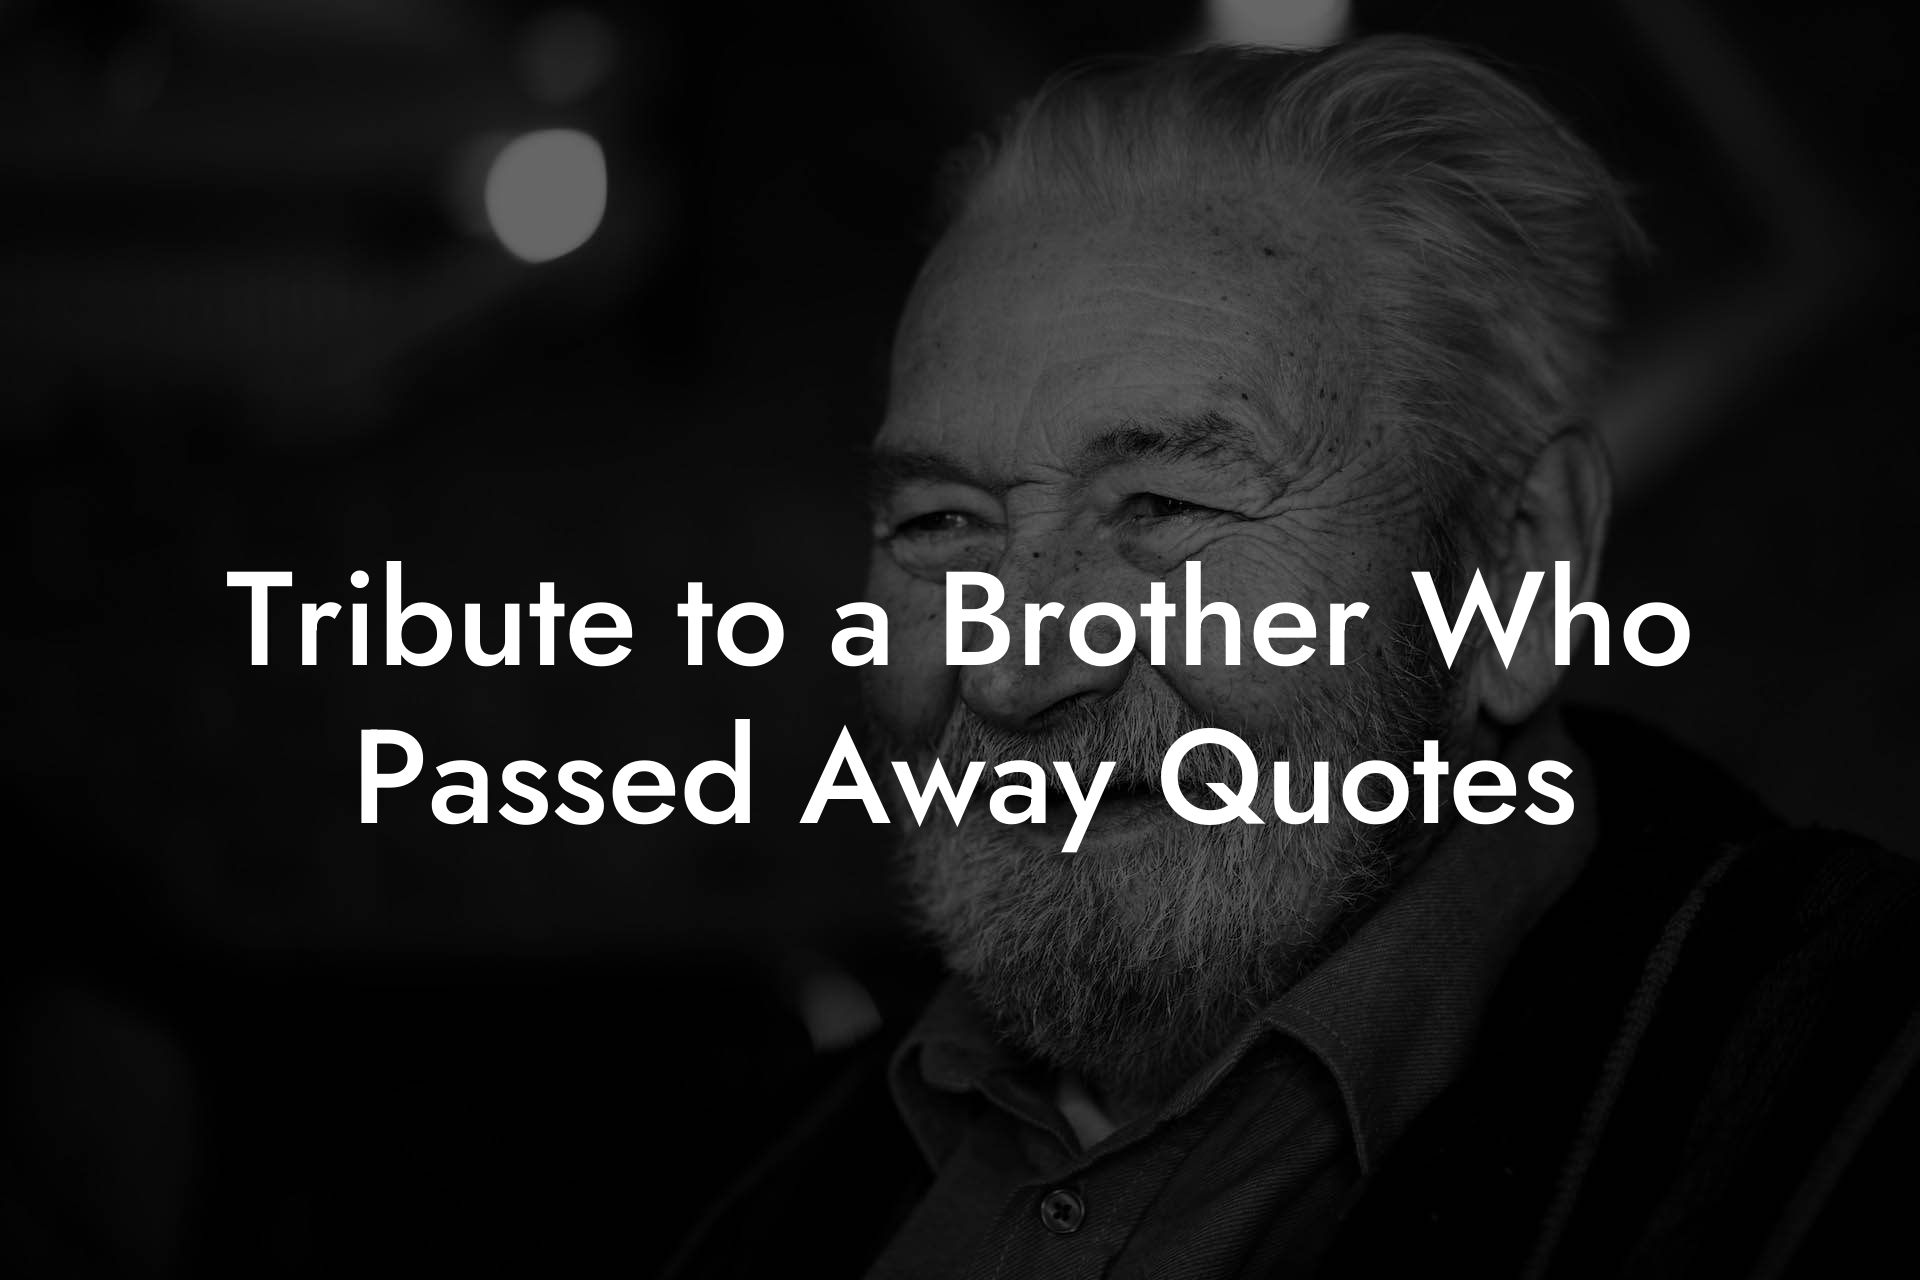 Tribute to a Brother Who Passed Away Quotes